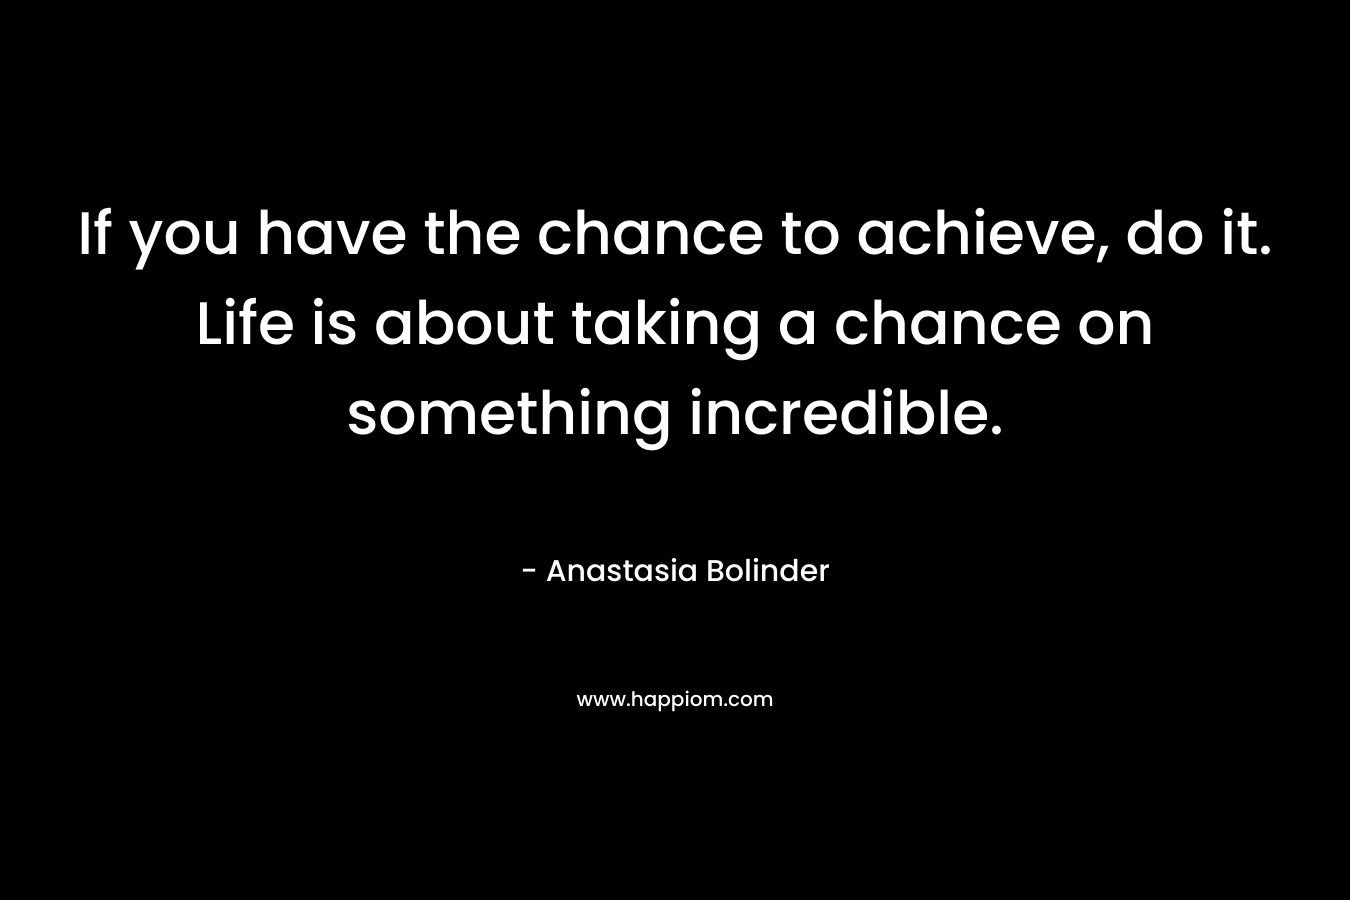 If you have the chance to achieve, do it. Life is about taking a chance on something incredible.